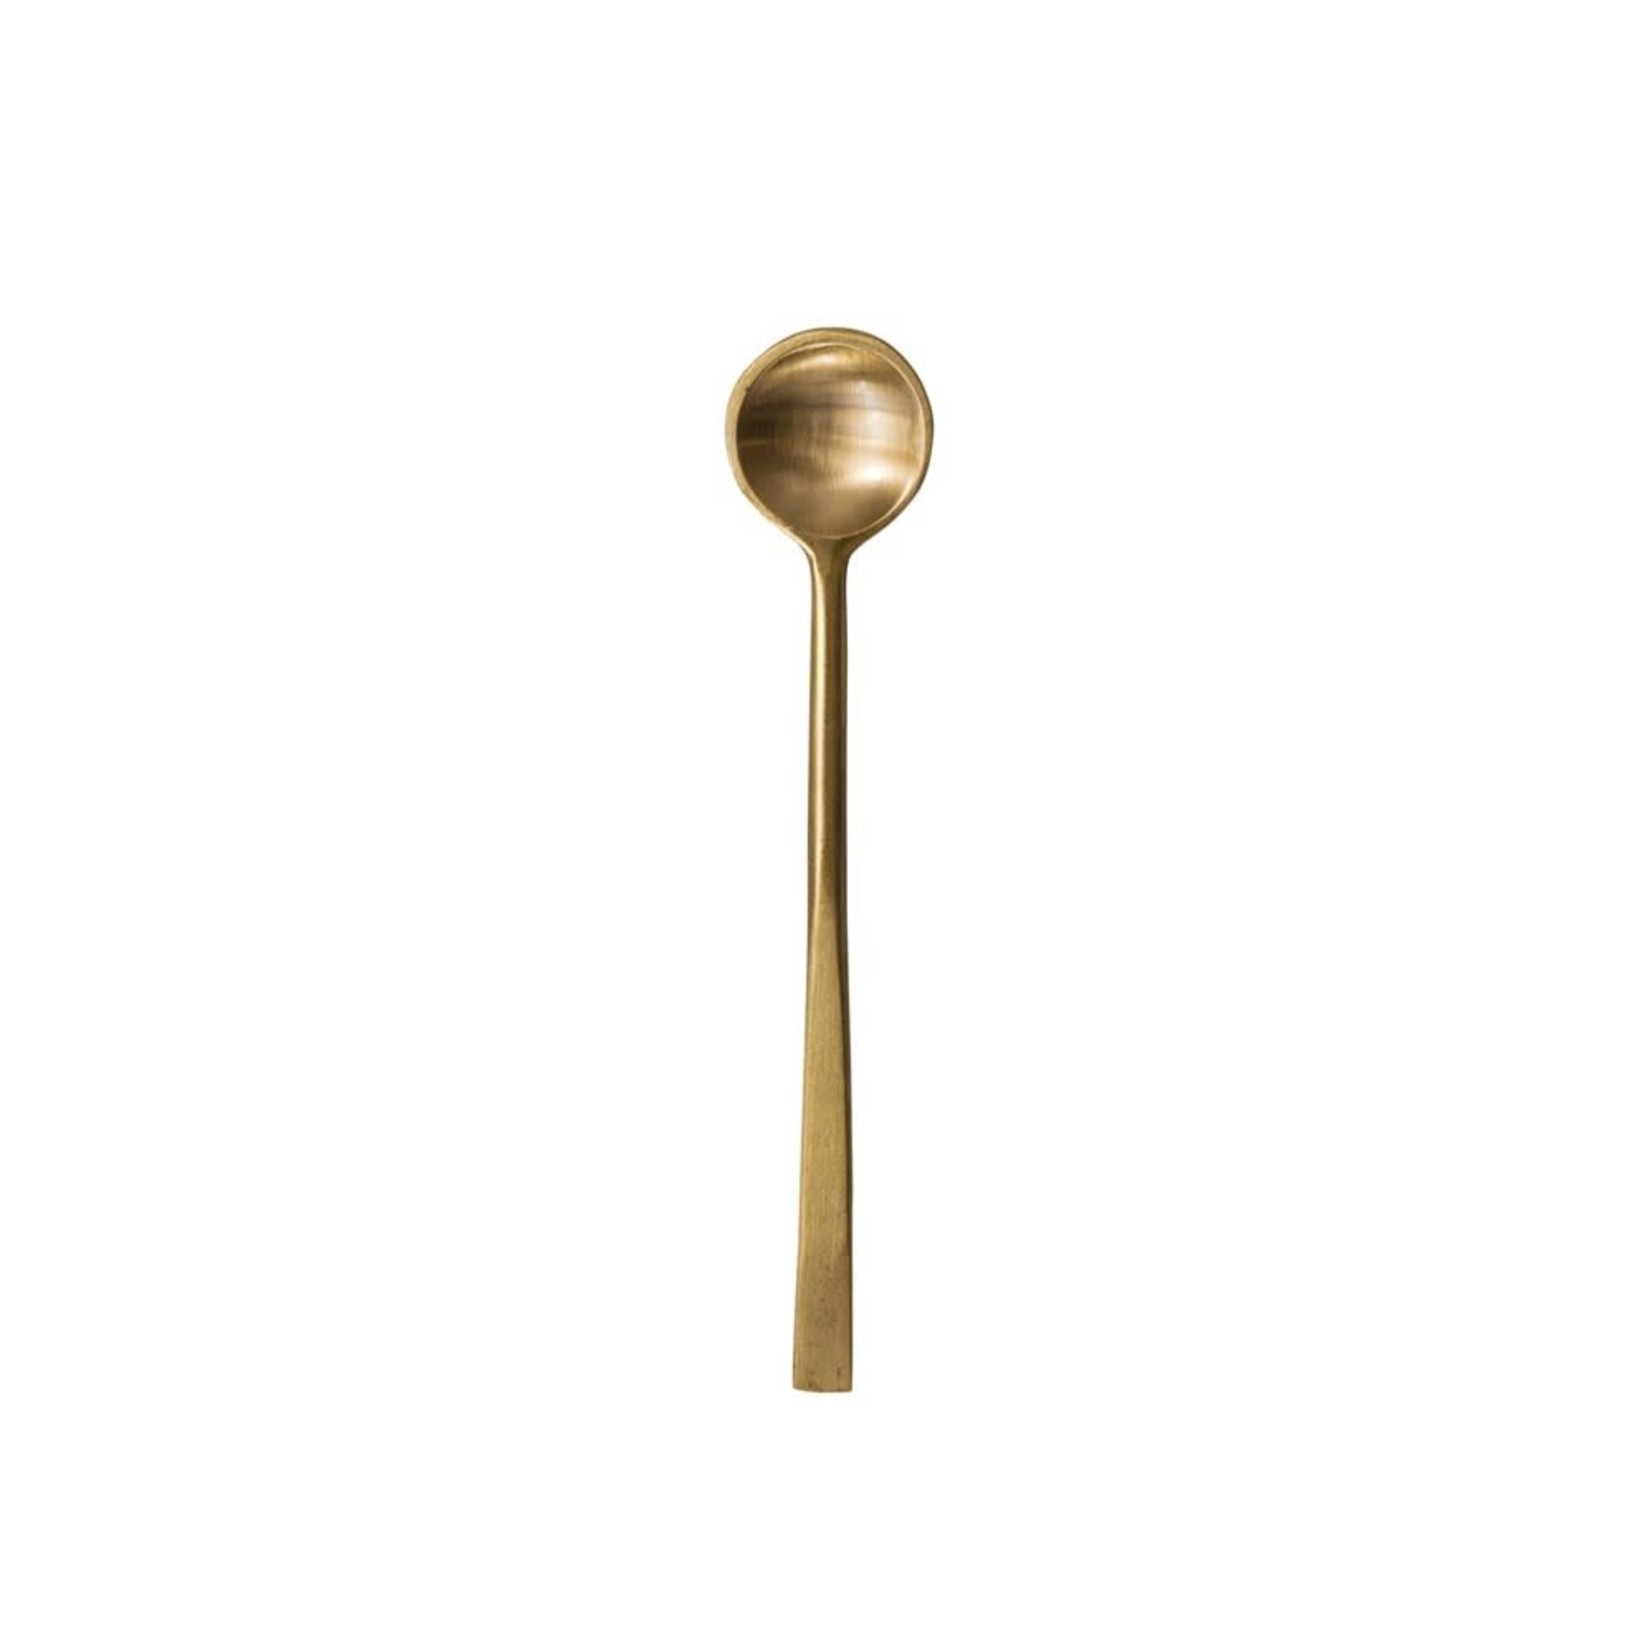 Stainless Steel Spoon Antique Brass Finish